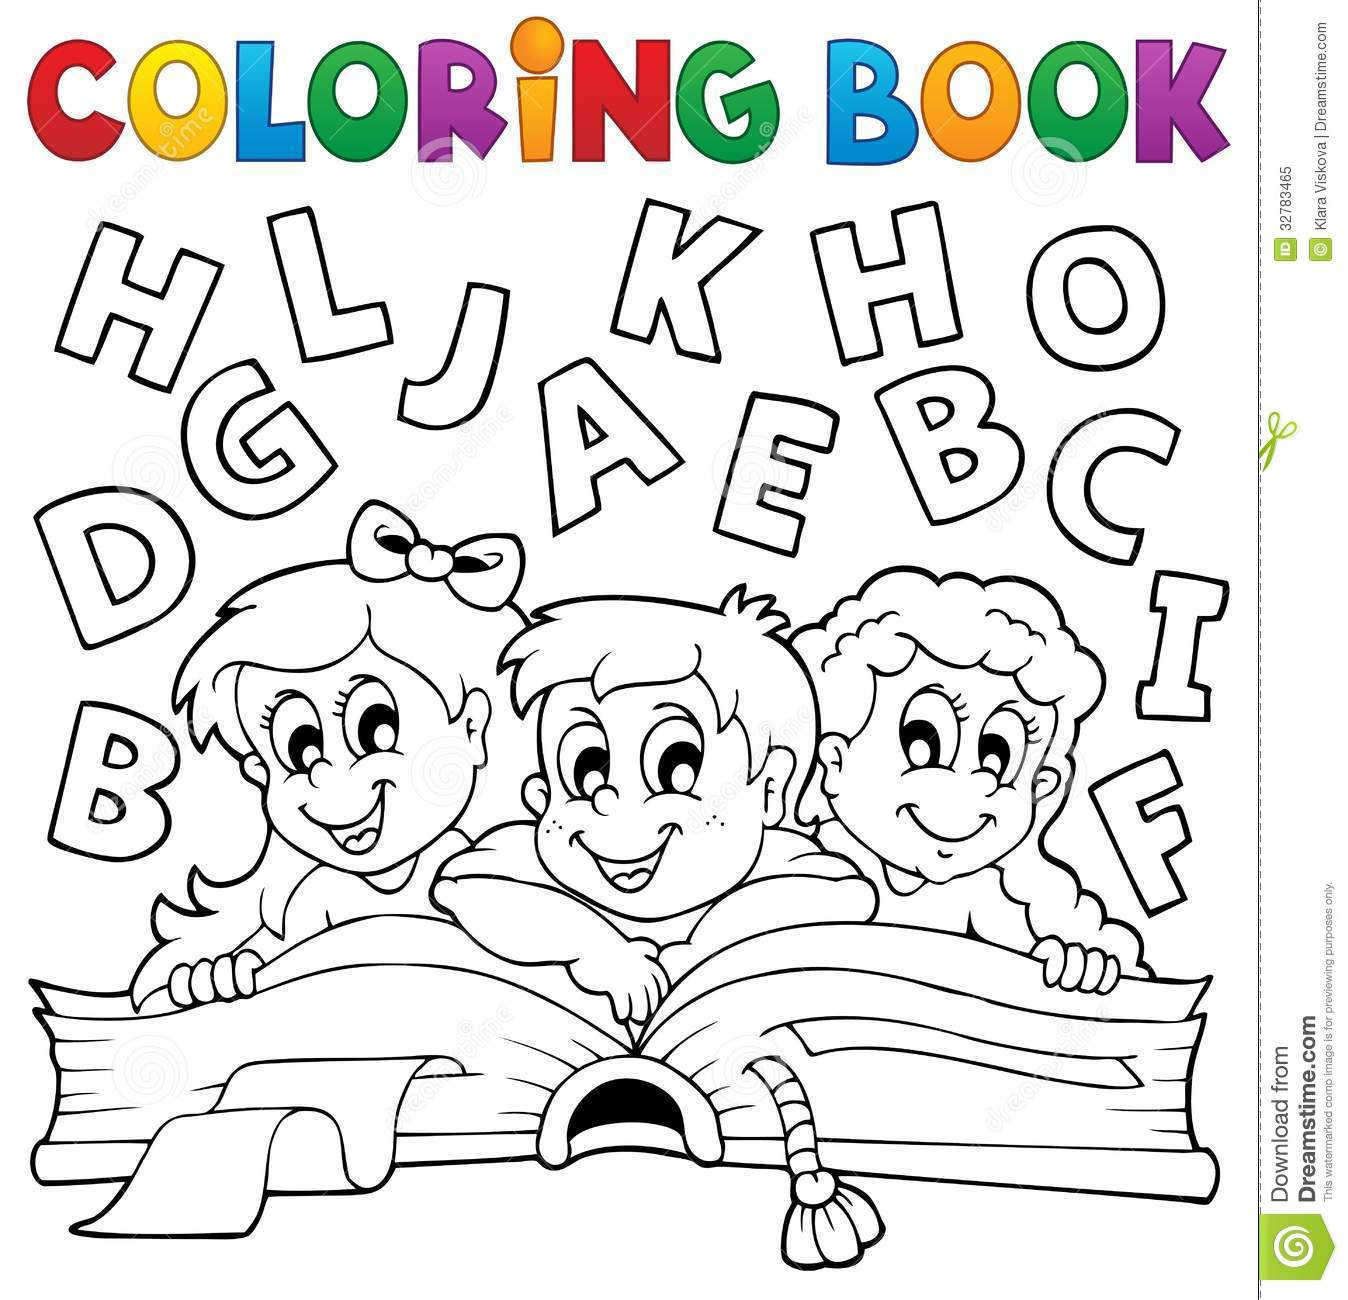 Coloring Books For Children
 Coloring book kids theme 5 stock vector Image of clipart